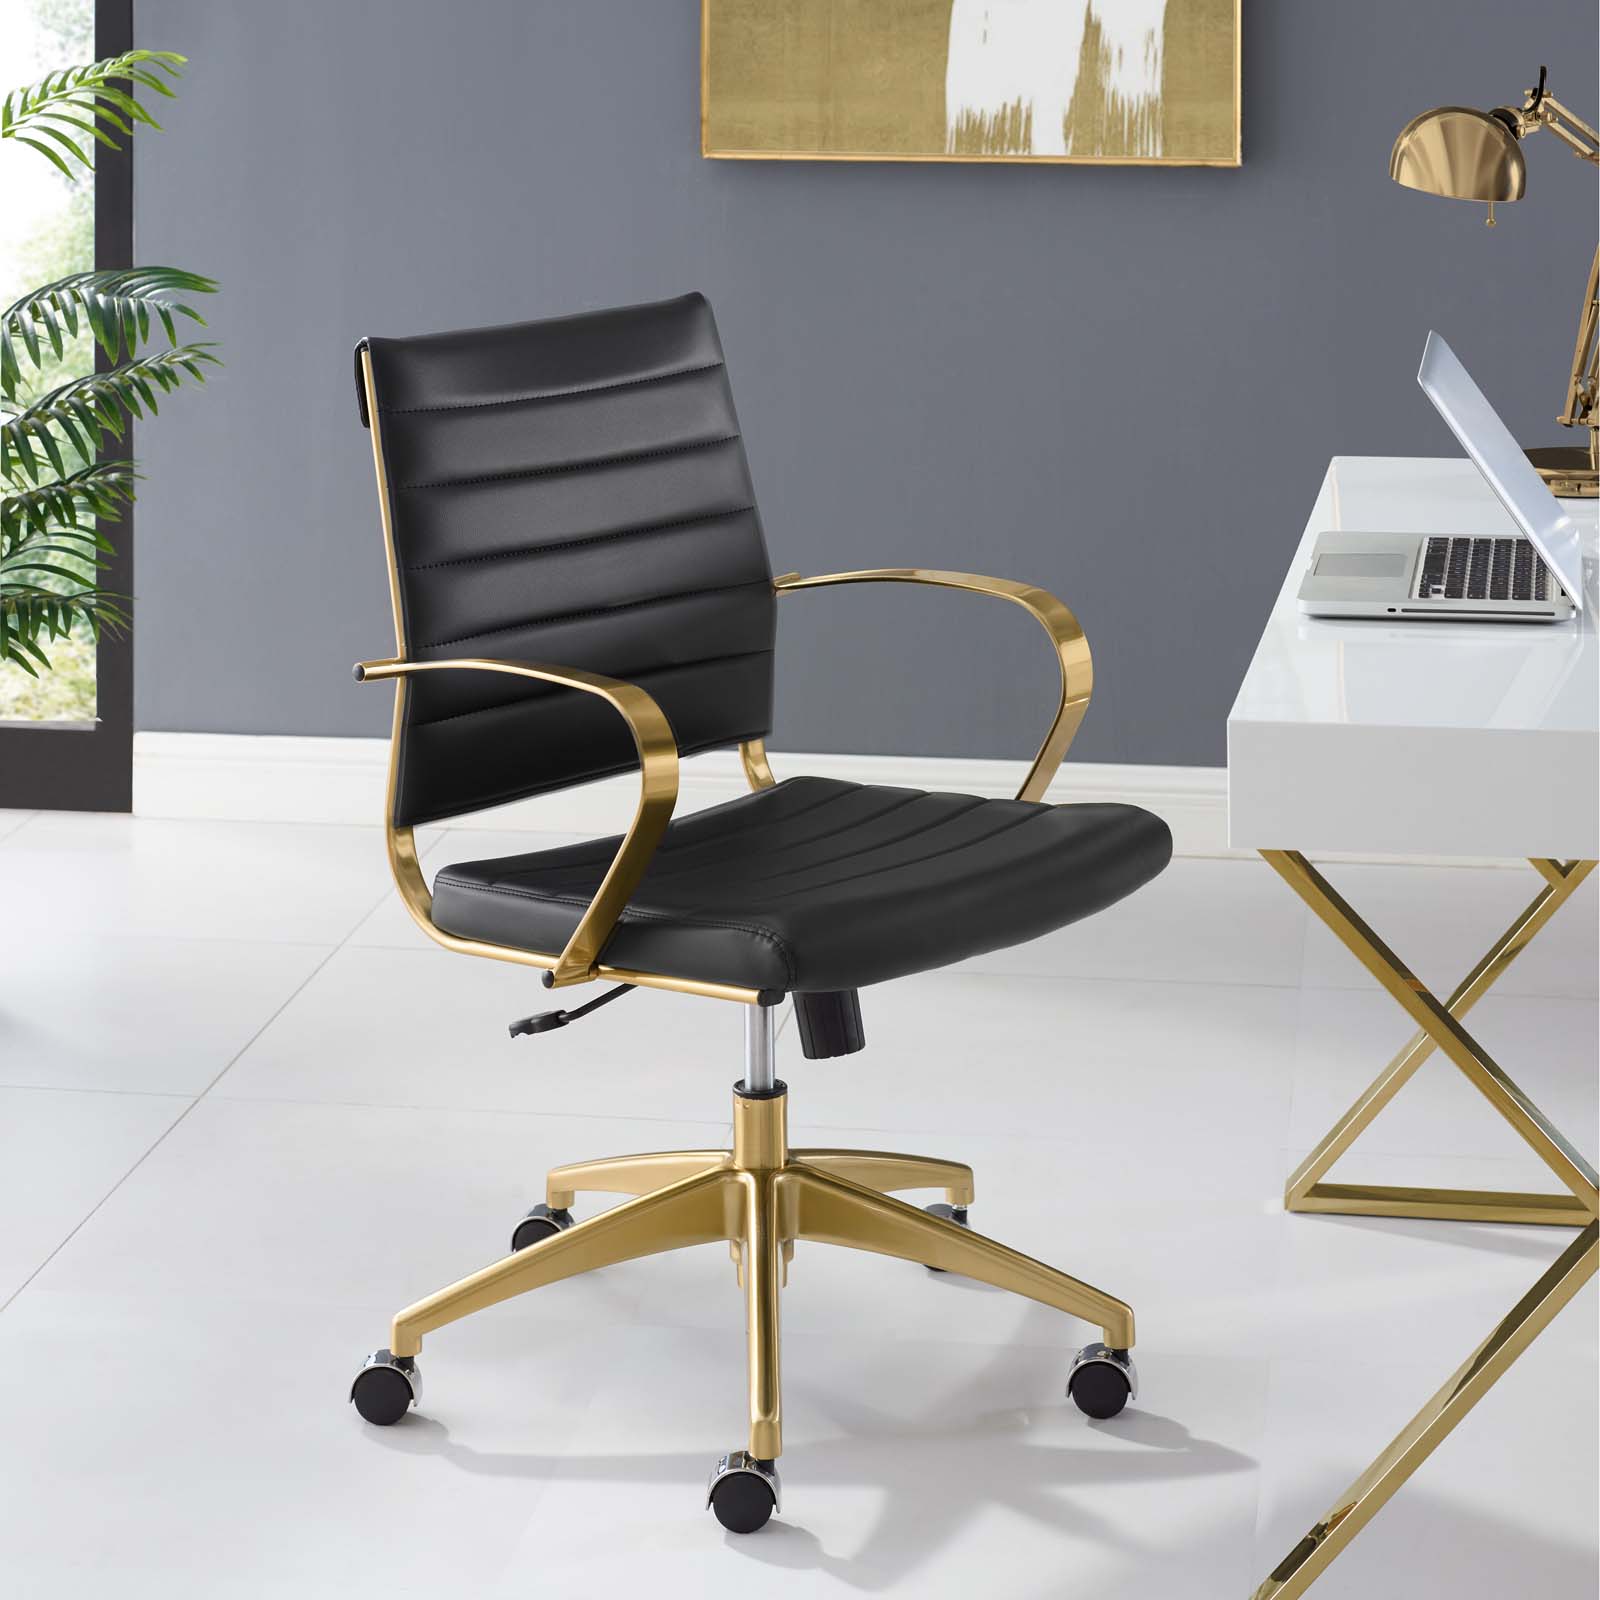 Jive Gold Stainless Steel Midback Office Chair Gold Black